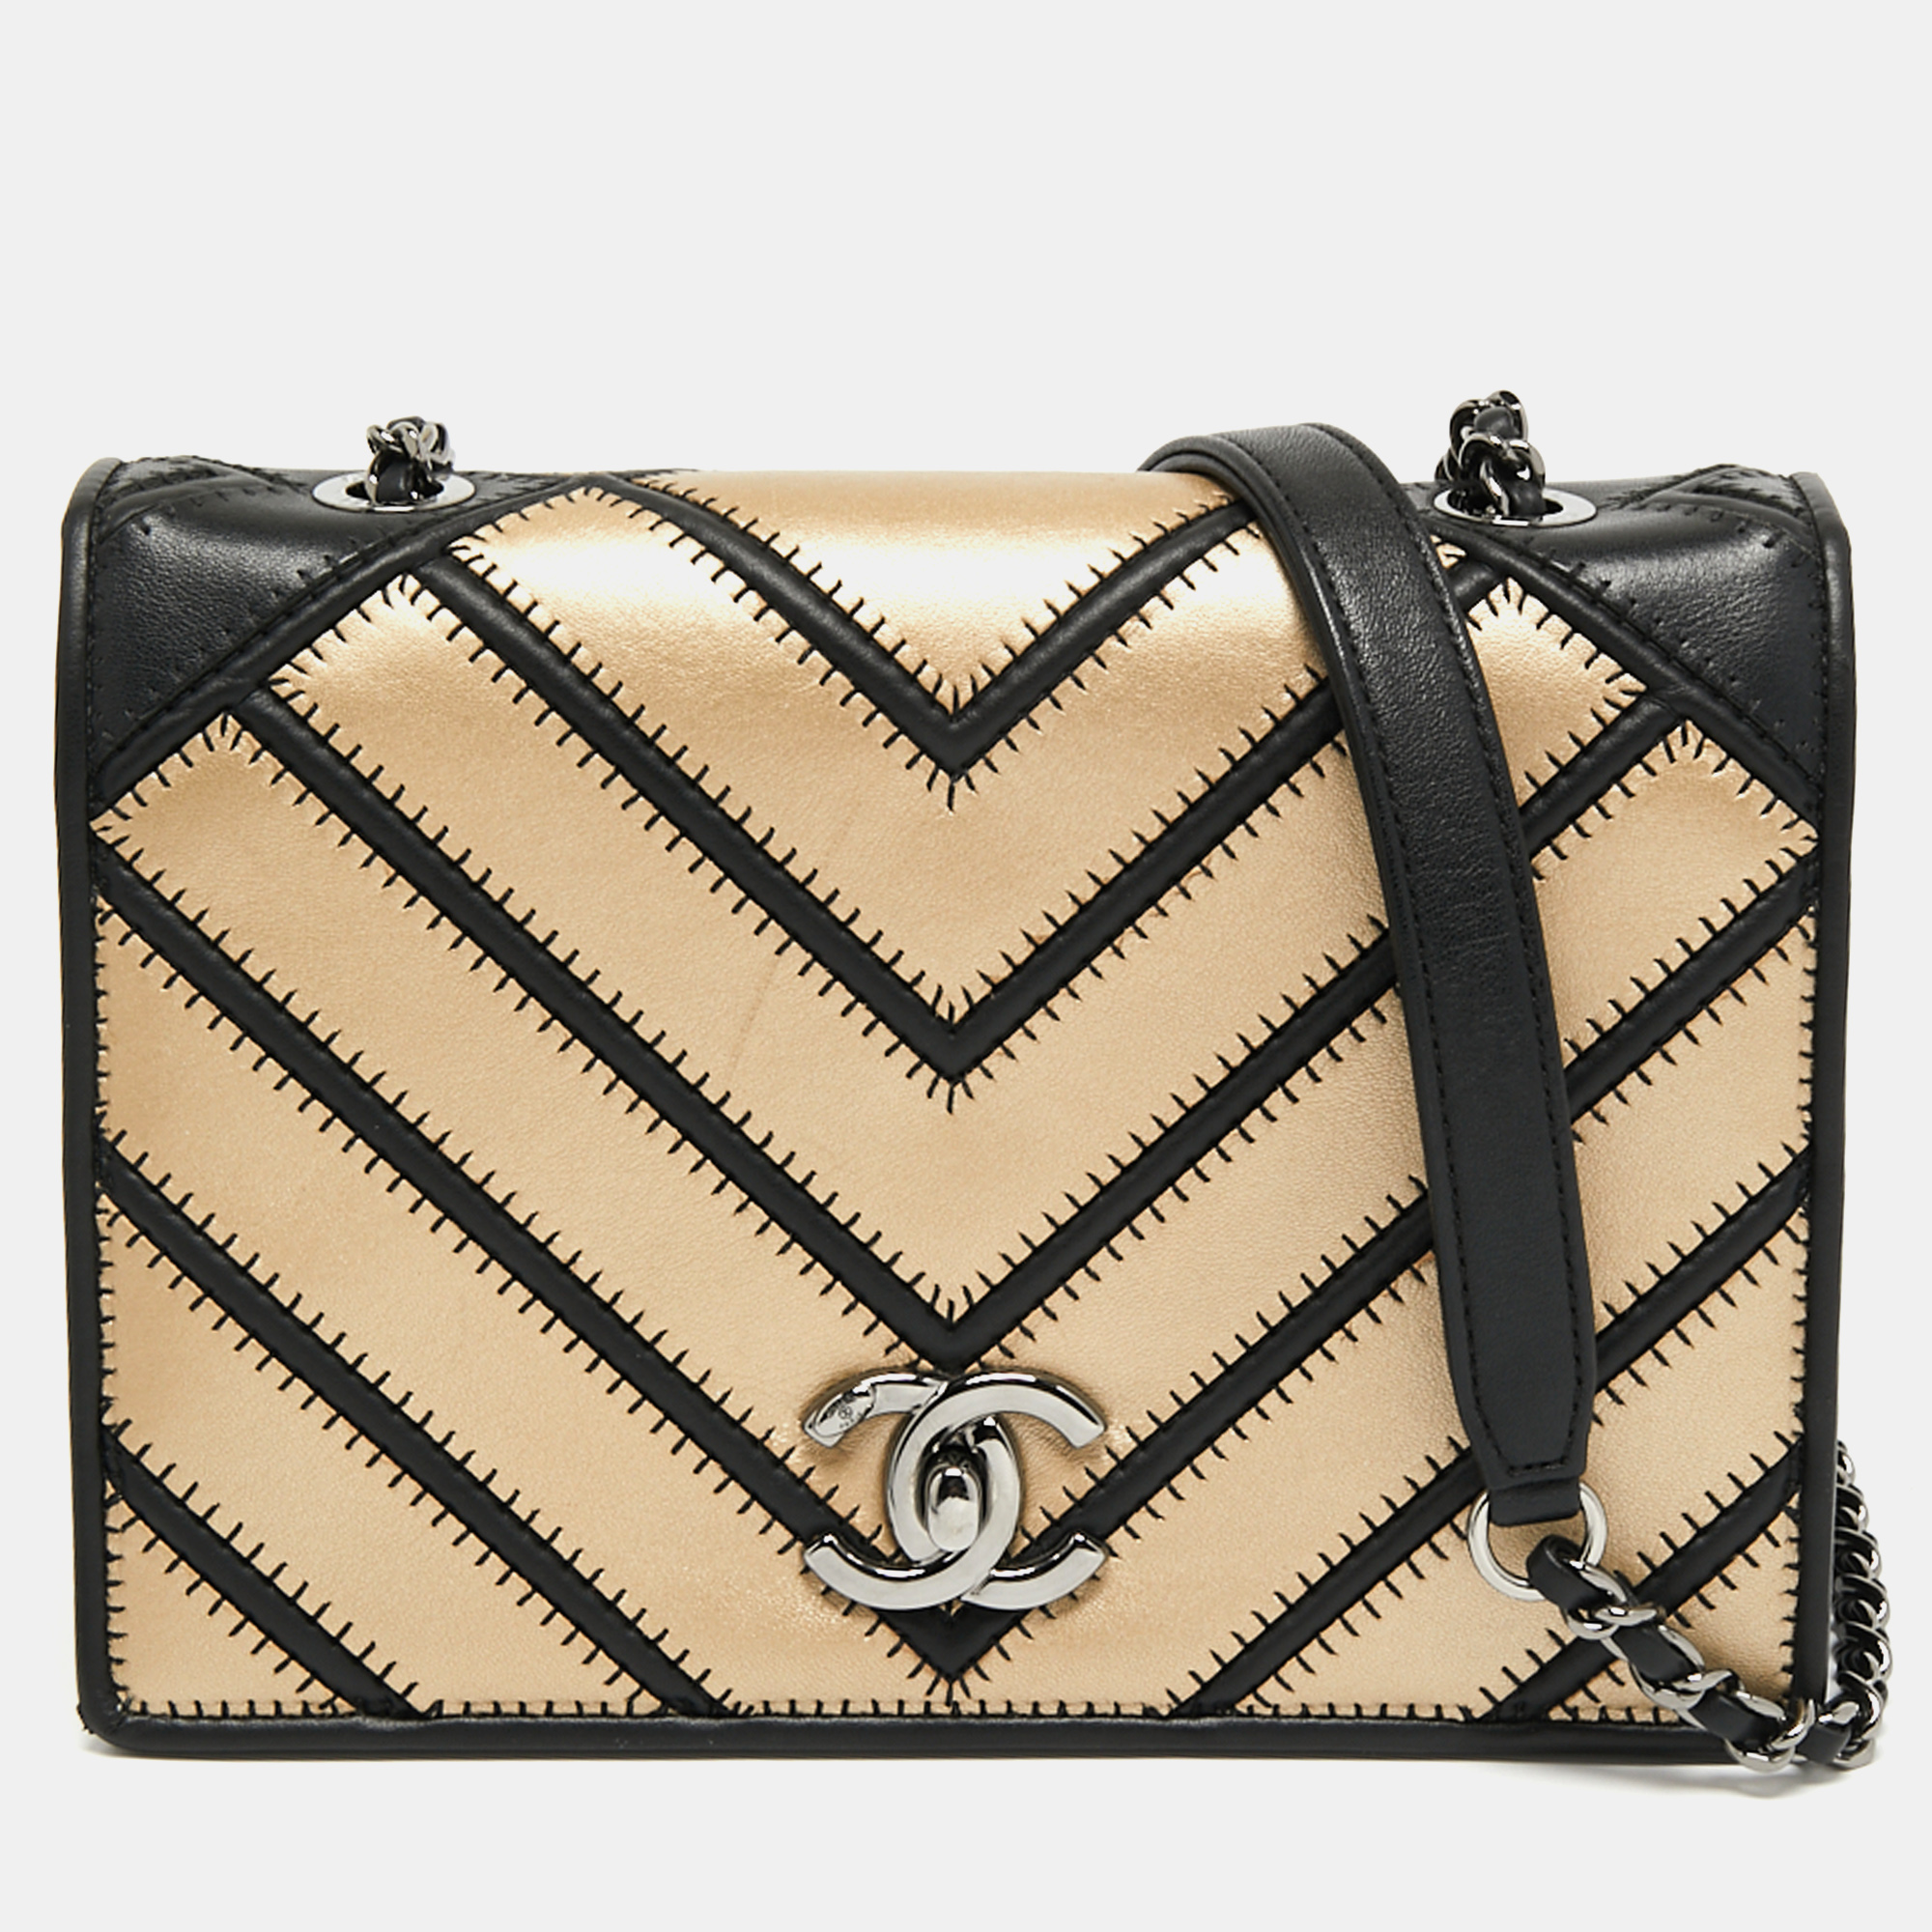 Chanel Gold/Black Chevron Couture Leather Small Flap Shoulder Bag Chanel